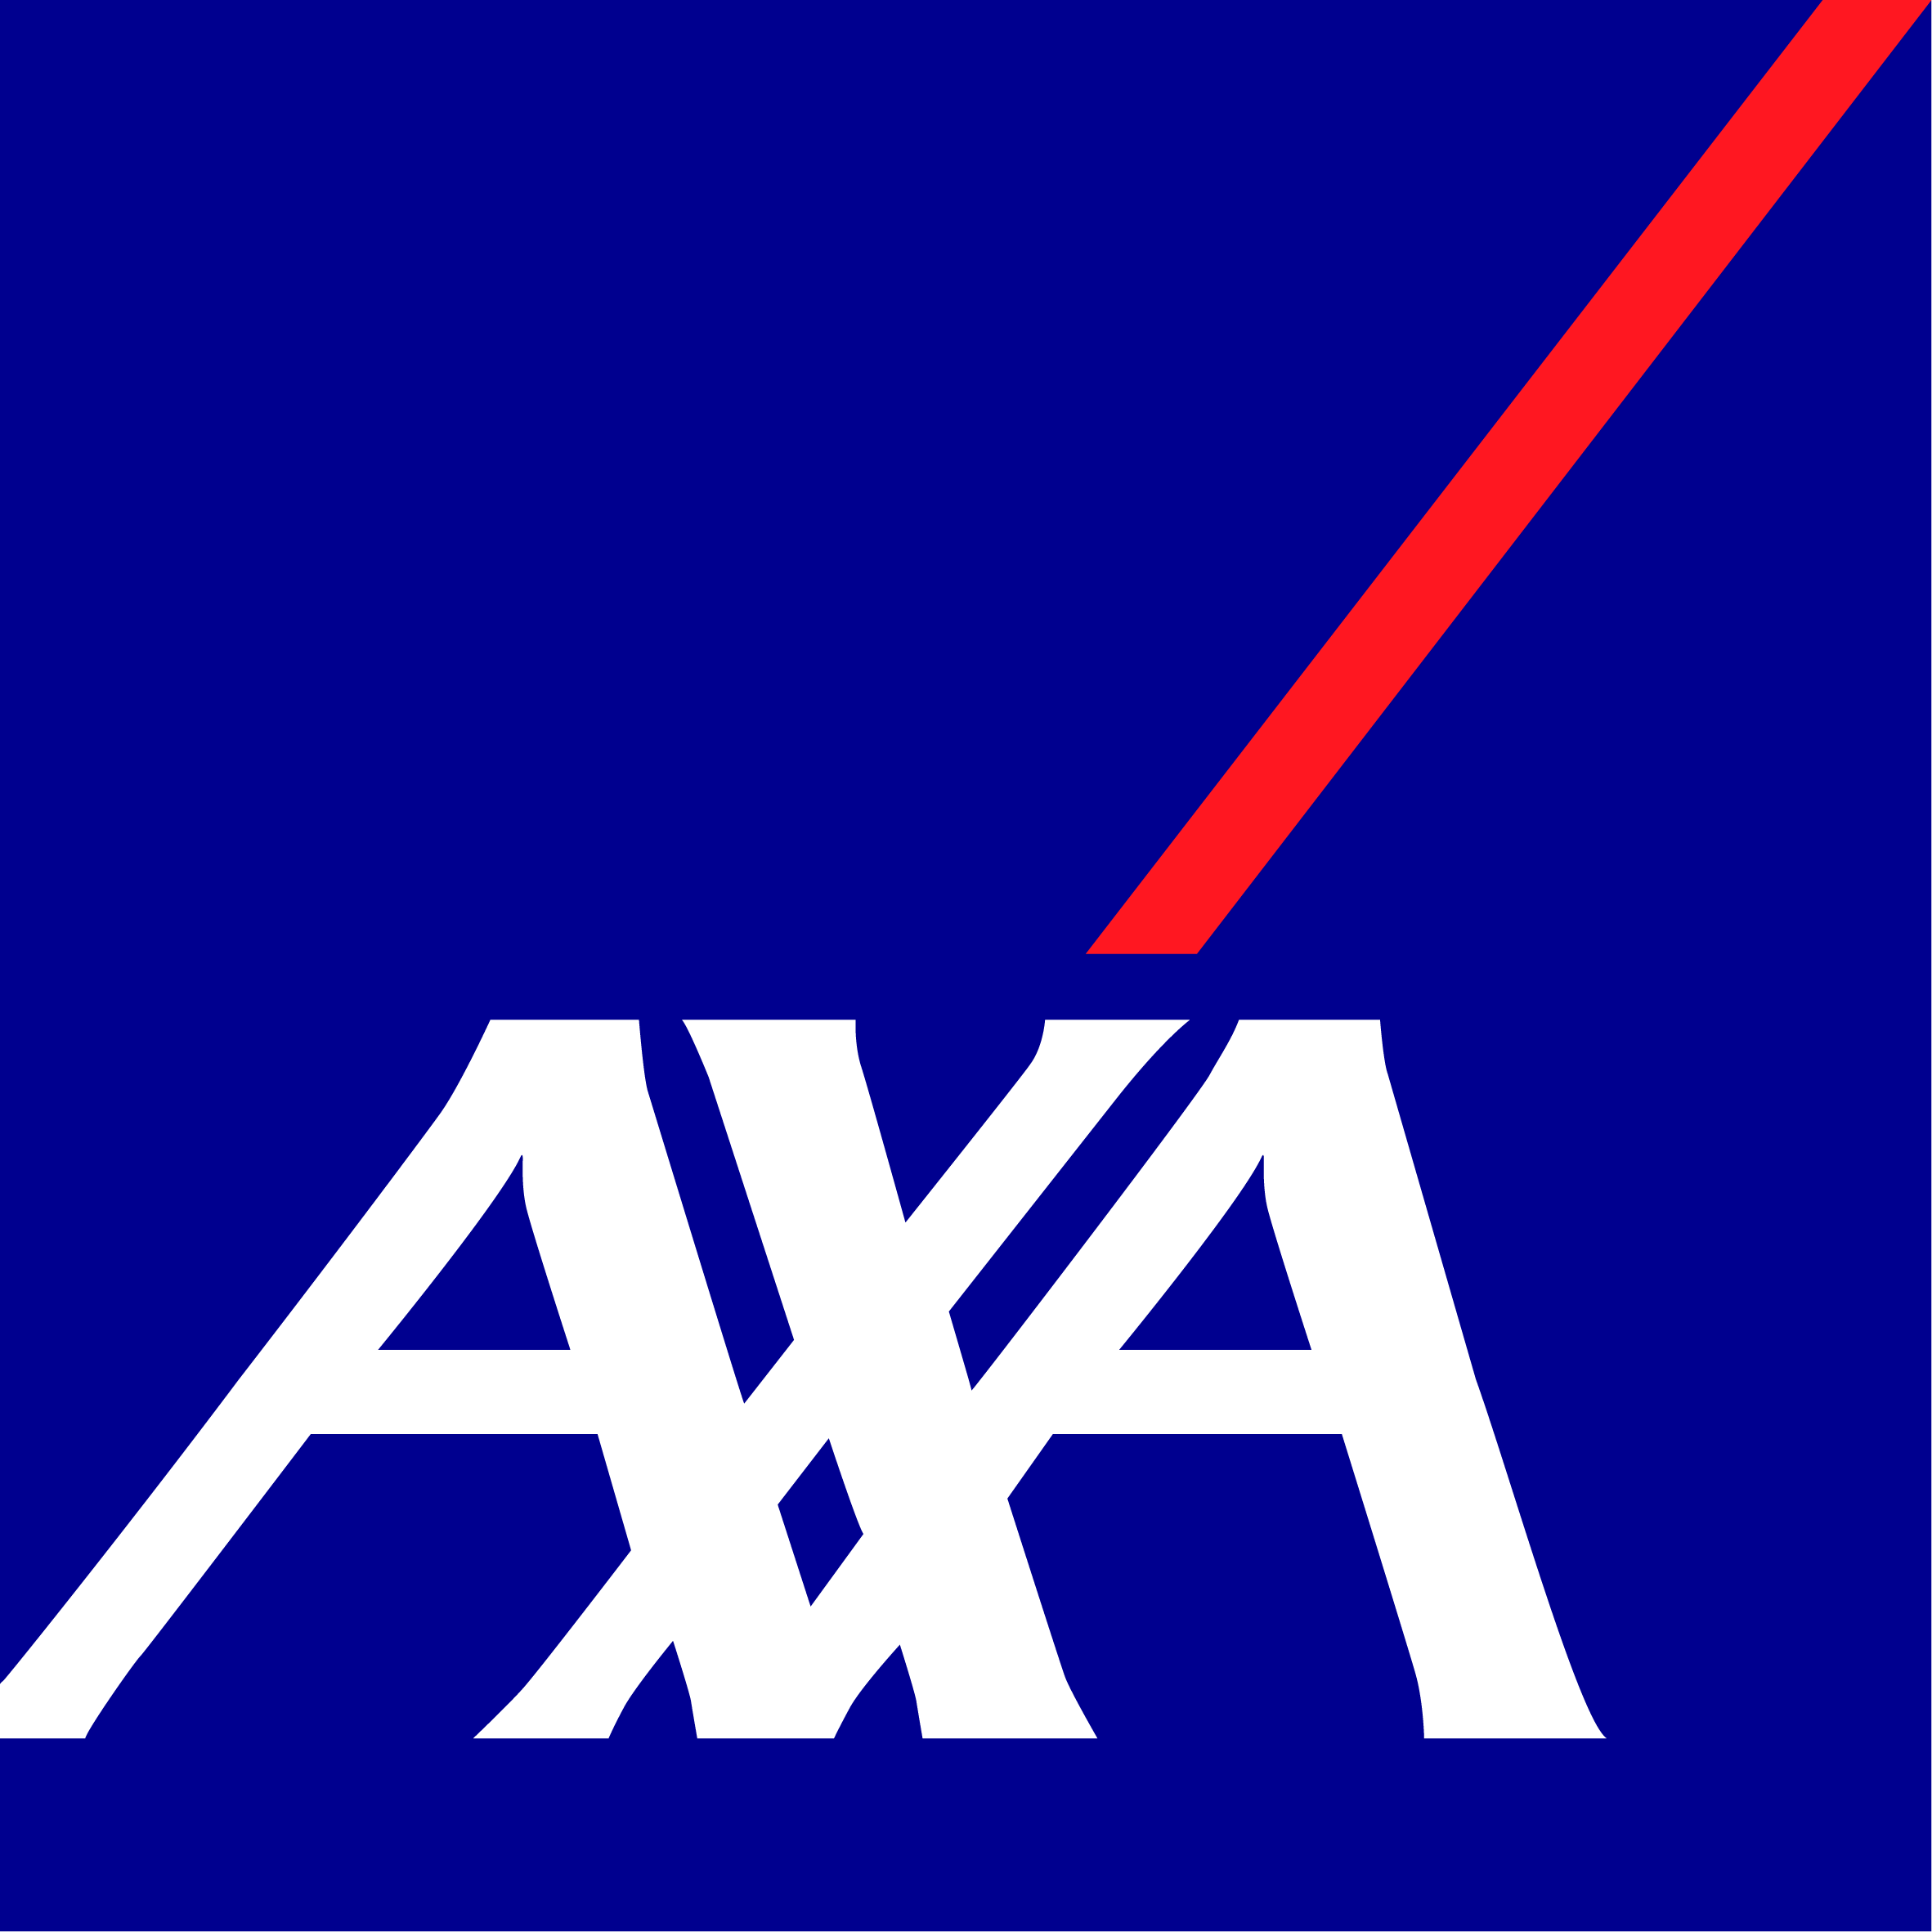 Axa as one of the leading companies and their commitments